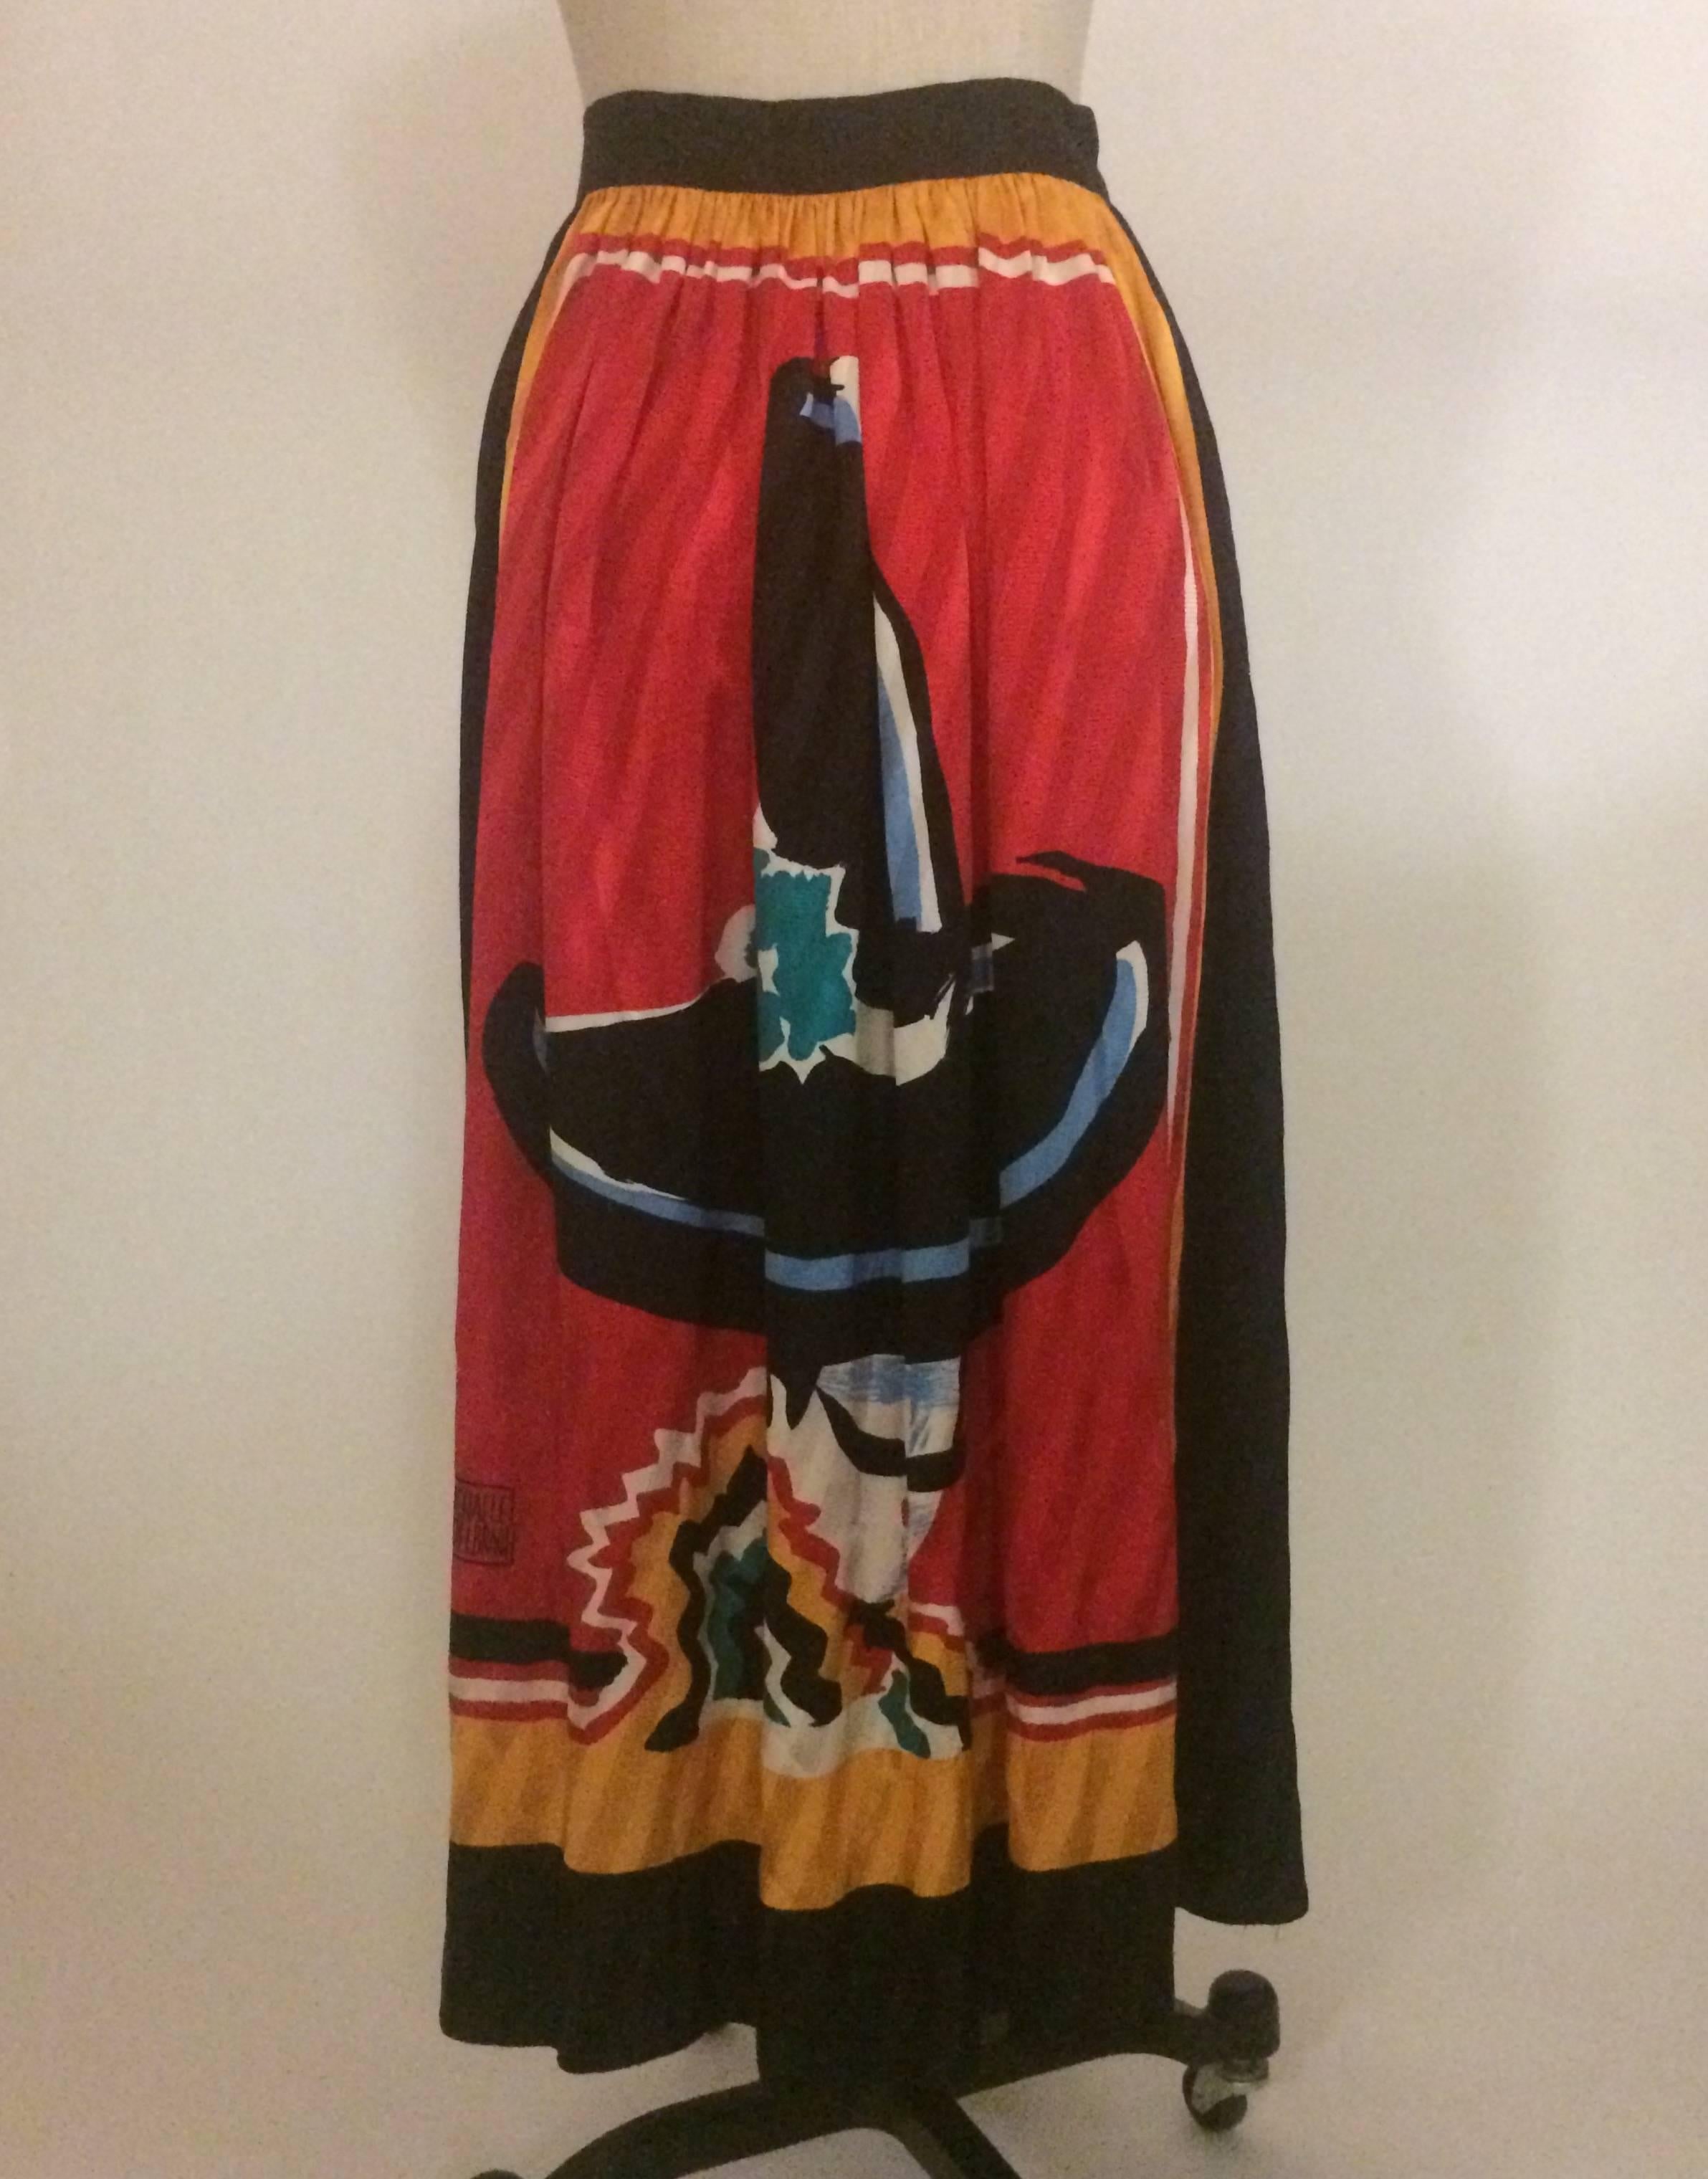 Michaele Vollbracht 1980s silk maxi skirt in yellow featuring image of a man in a sombrero hat on front and back. Fastens at side with a hook and eye at waist.

100% silk.

Made in Korea.

Size 10. Runs small, see measurements.
Waist 30